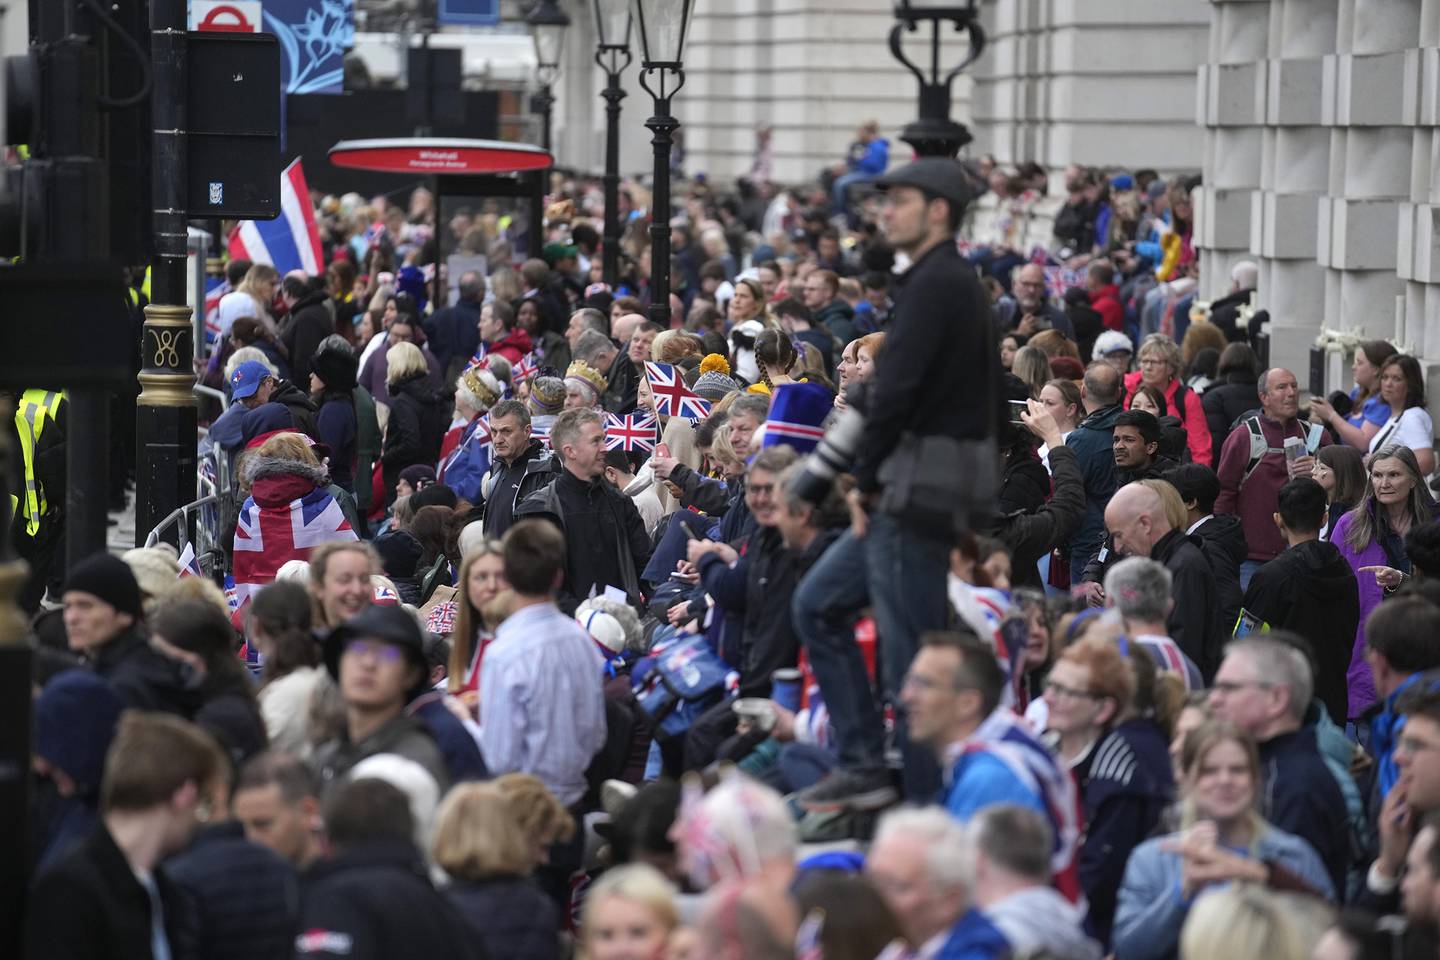 A crowd gathers at Whitehall ahead of the coronation ceremony for Britain's King Charles III in London. Photo / AP